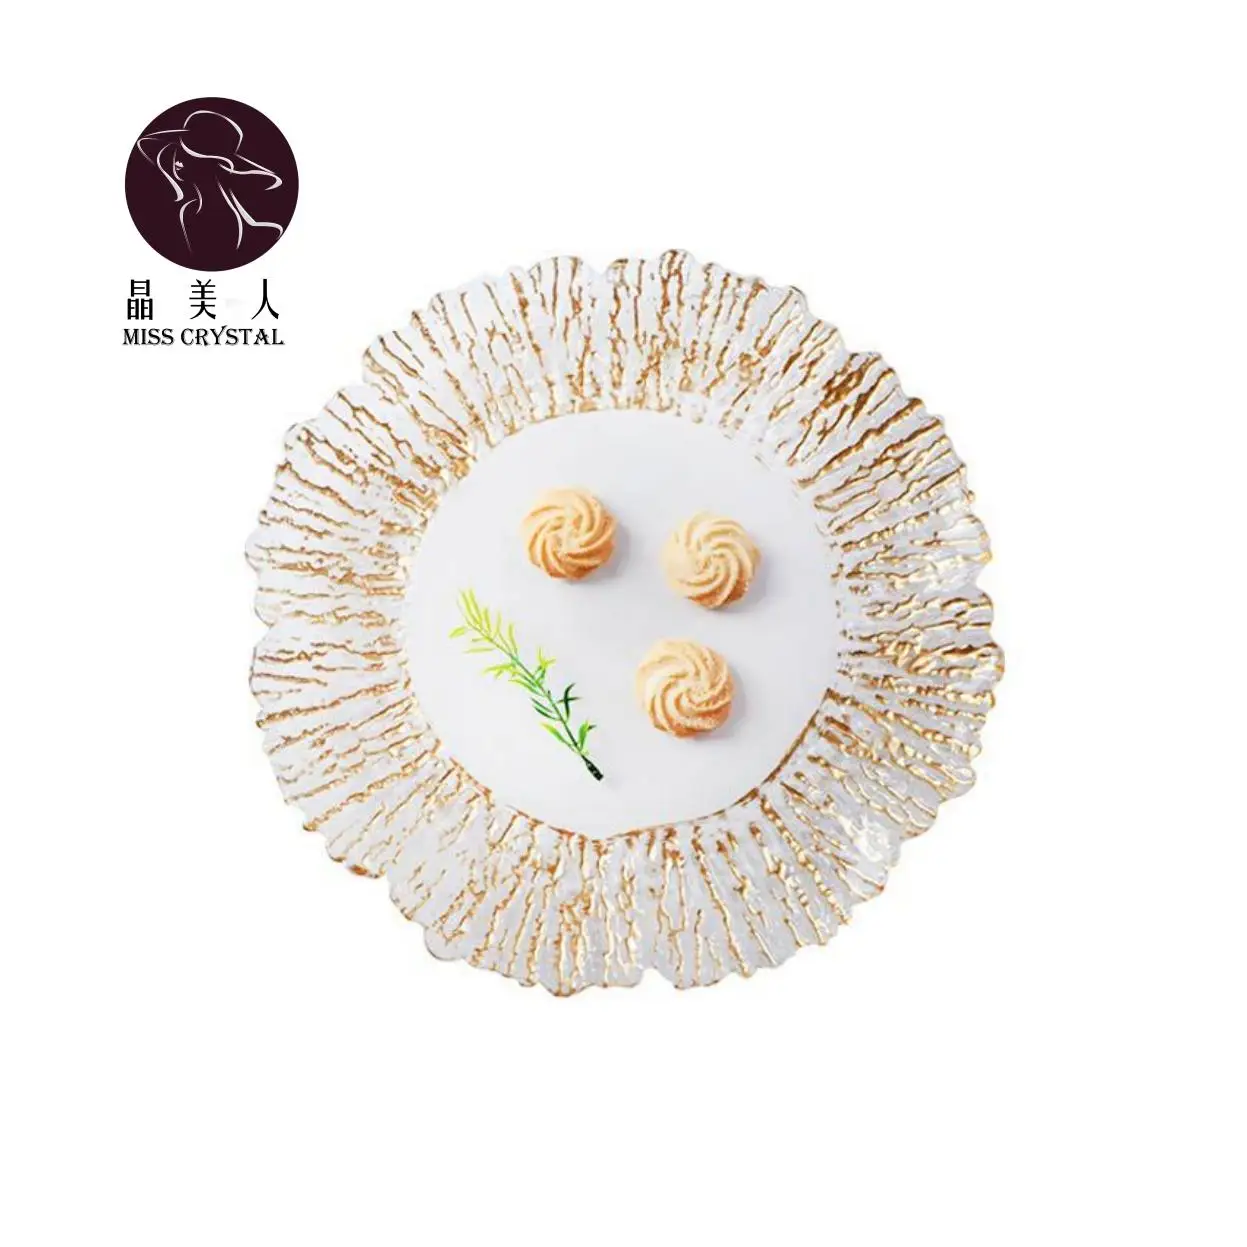 

Supplier Popular New design restaurant or wedding decor clear fancy glass charger plates with gold rim, As picture